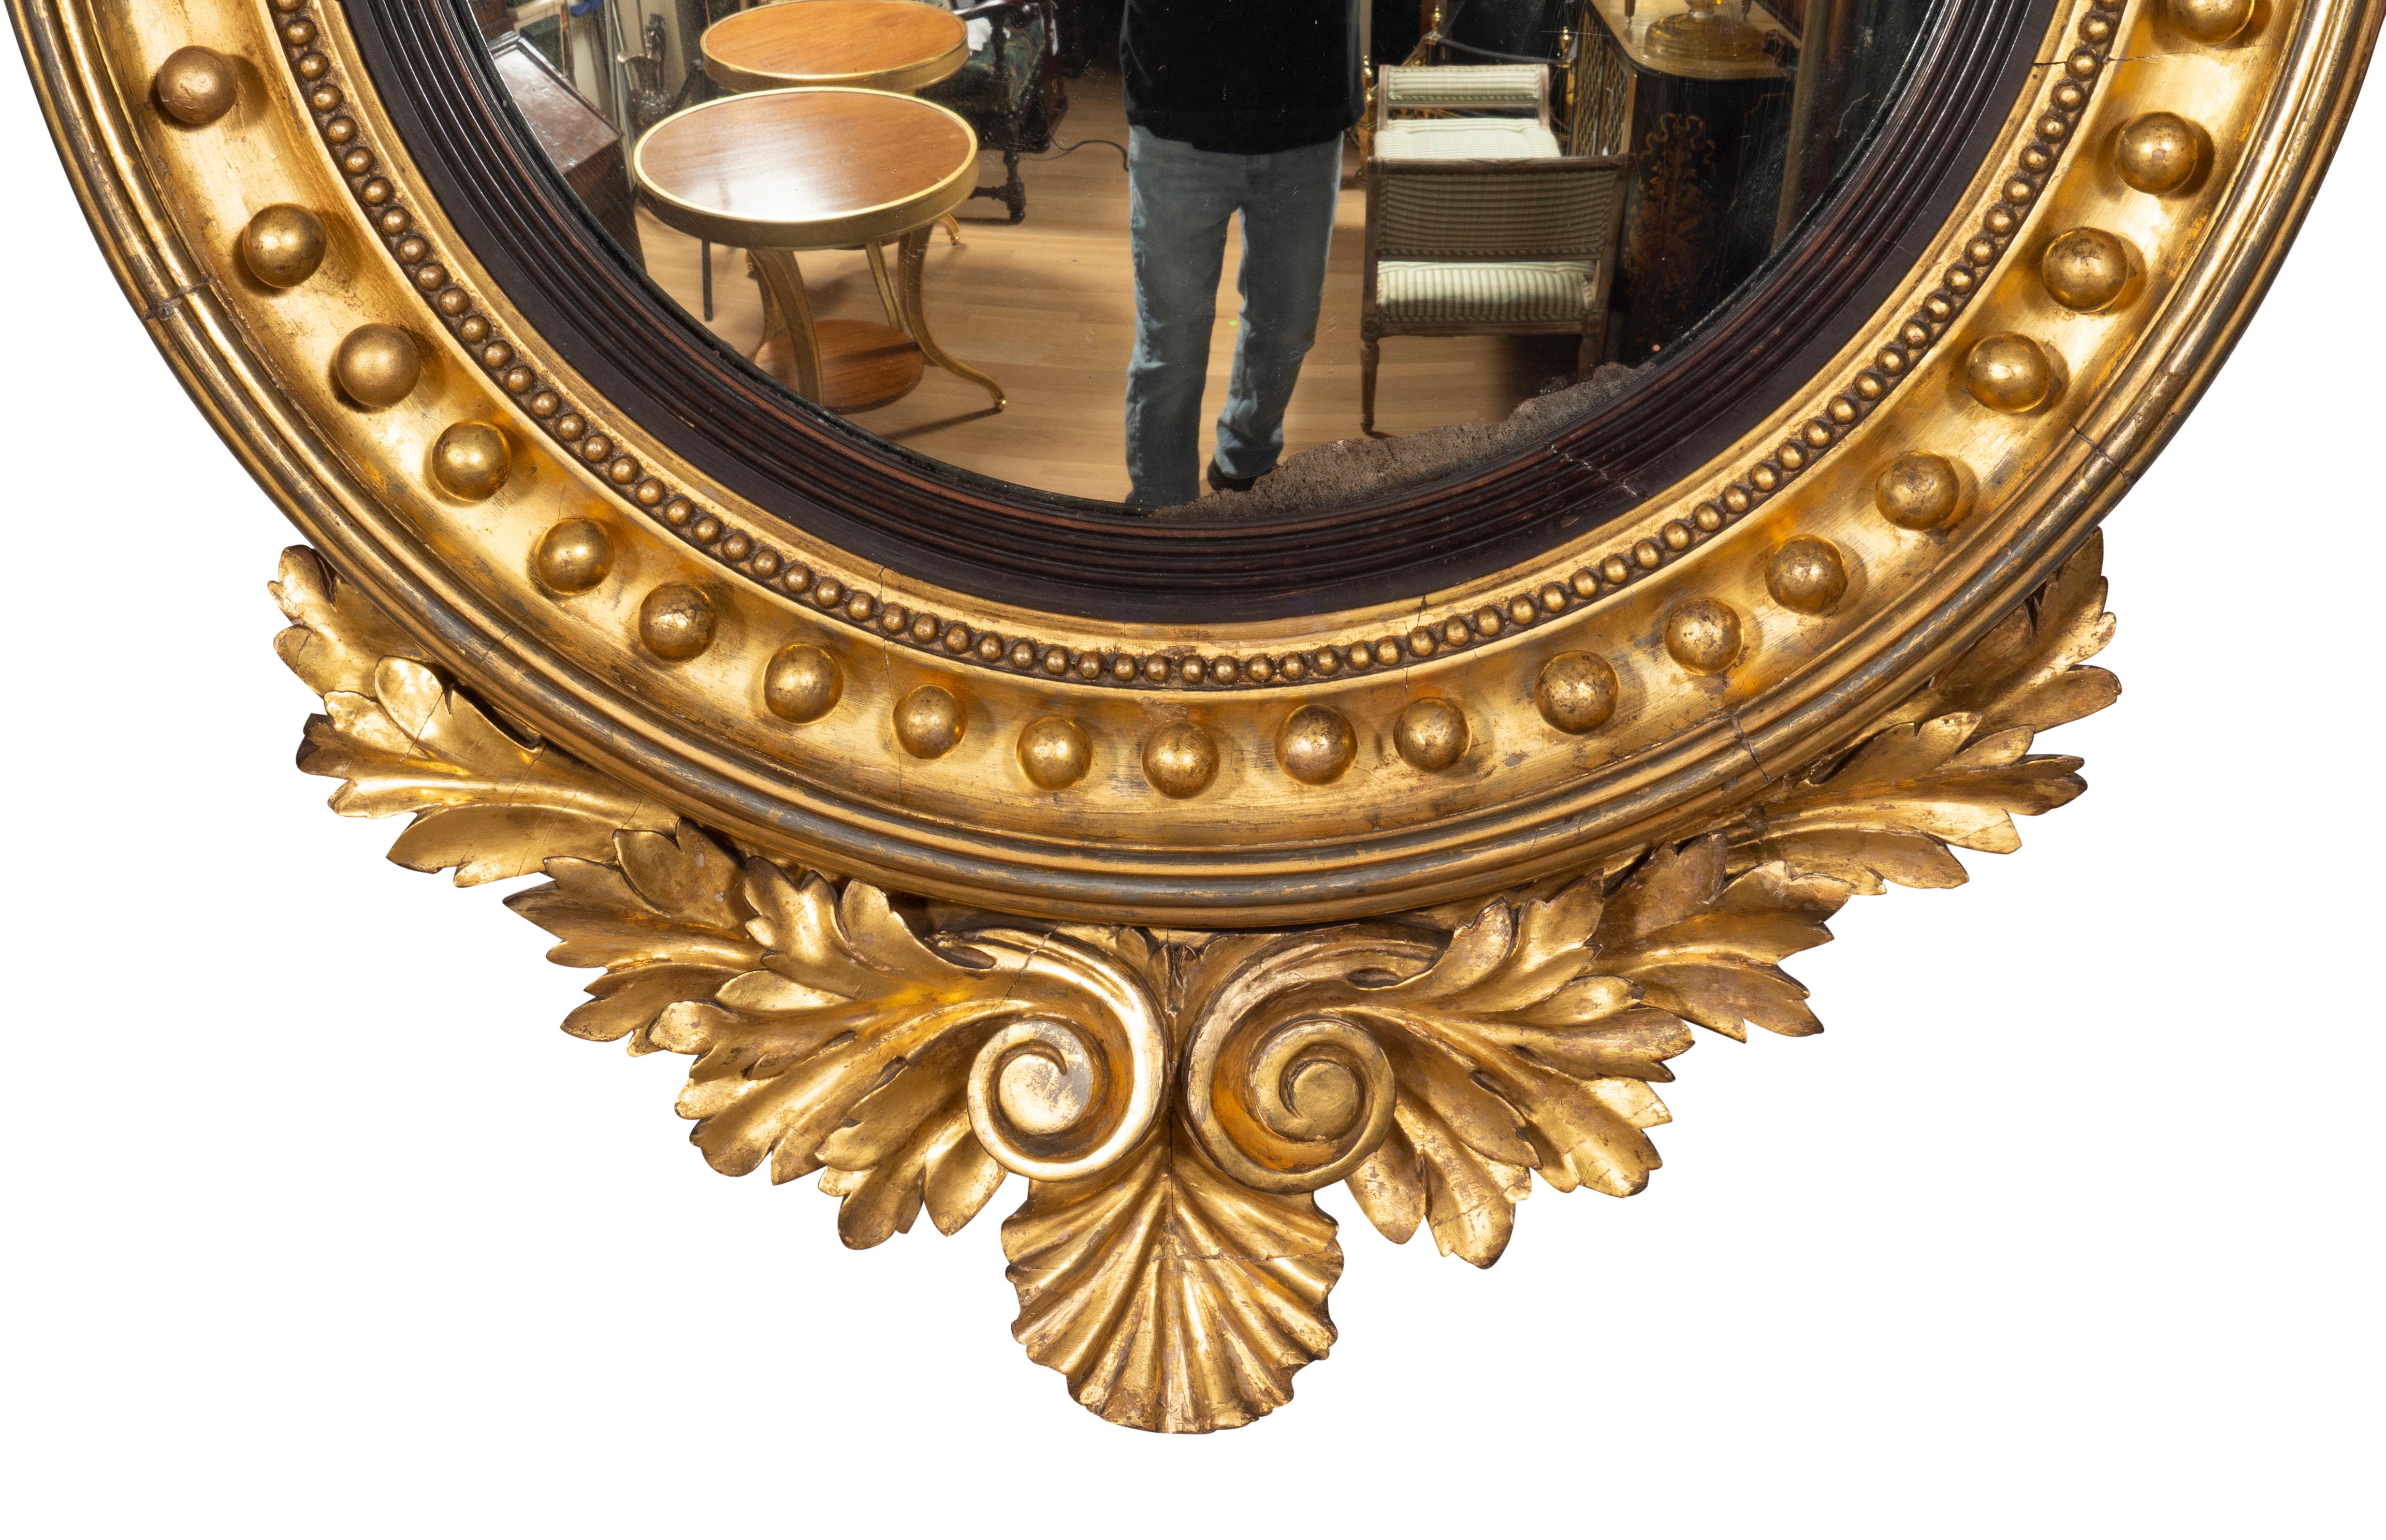 With convex glass and ebonized band in a conforming frame with mini spherules all around, flanked by acanthus leaves and headed by an eagle standing on a conch shell. The base of the mirror with acanthus leaf carved decoration. Original gilding with